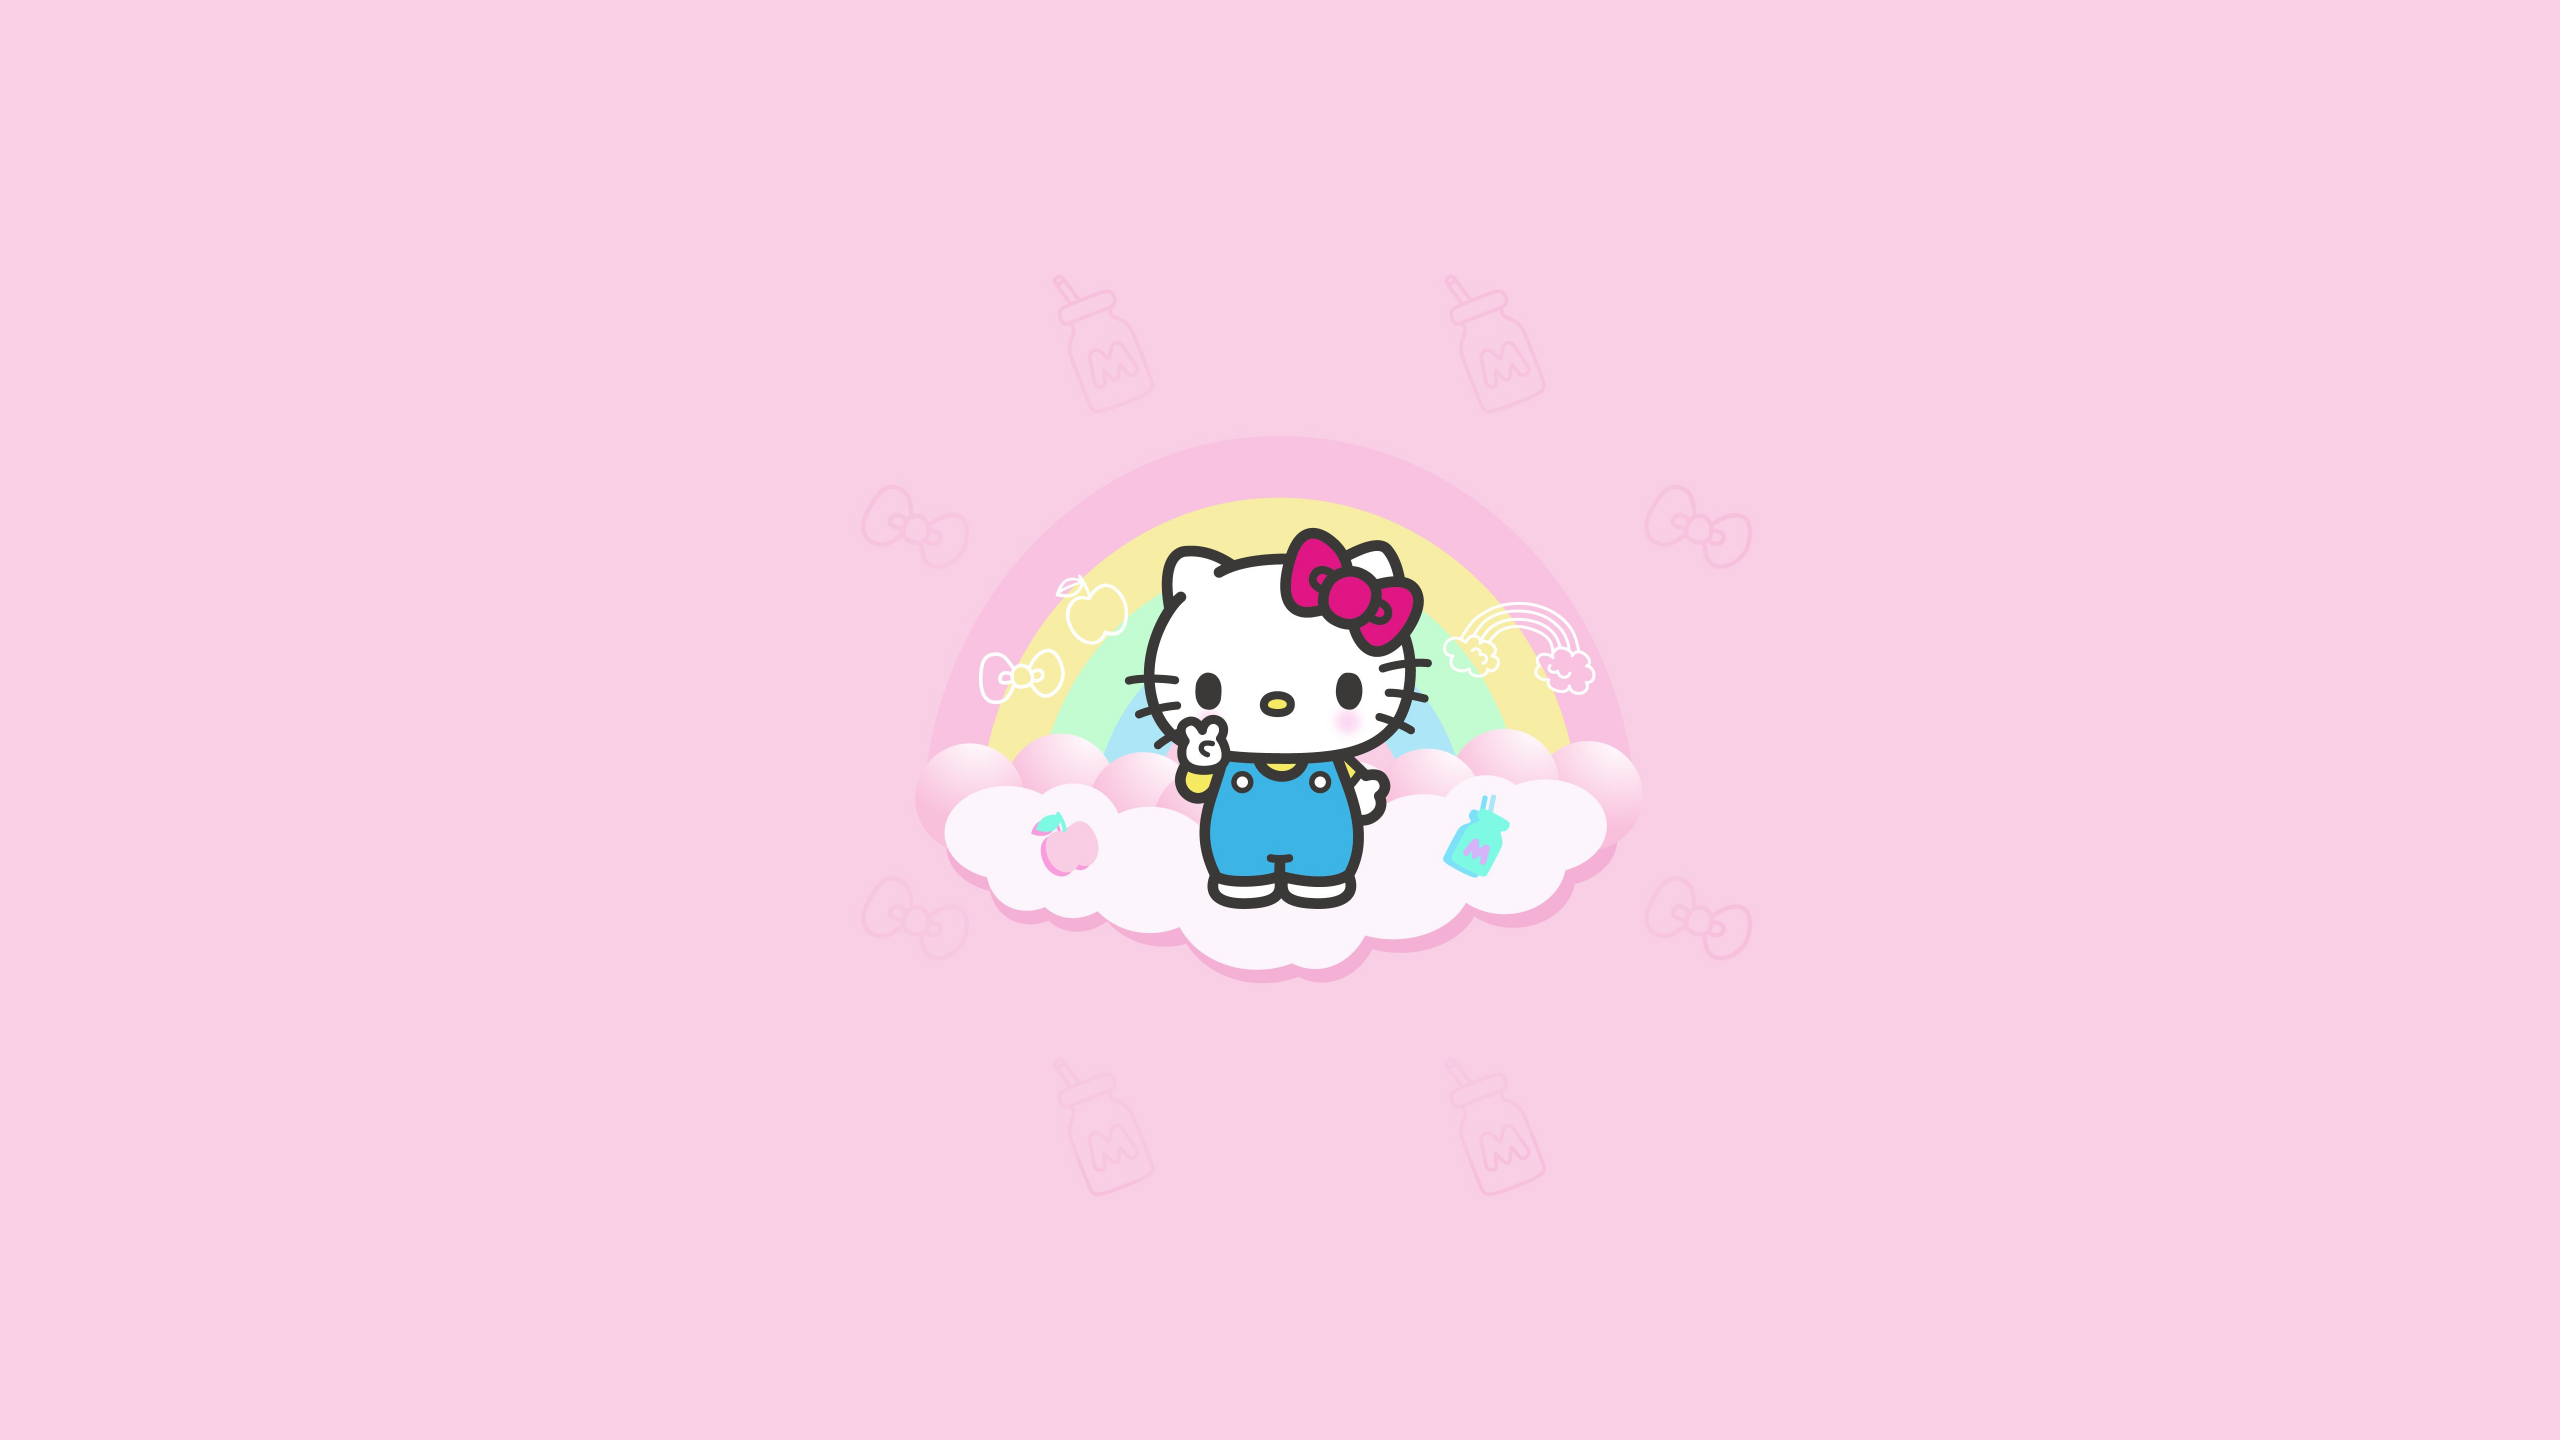 5 New My Melody Phone Wallpapers From Sanrio That Are Free  GirlStyle  Singapore